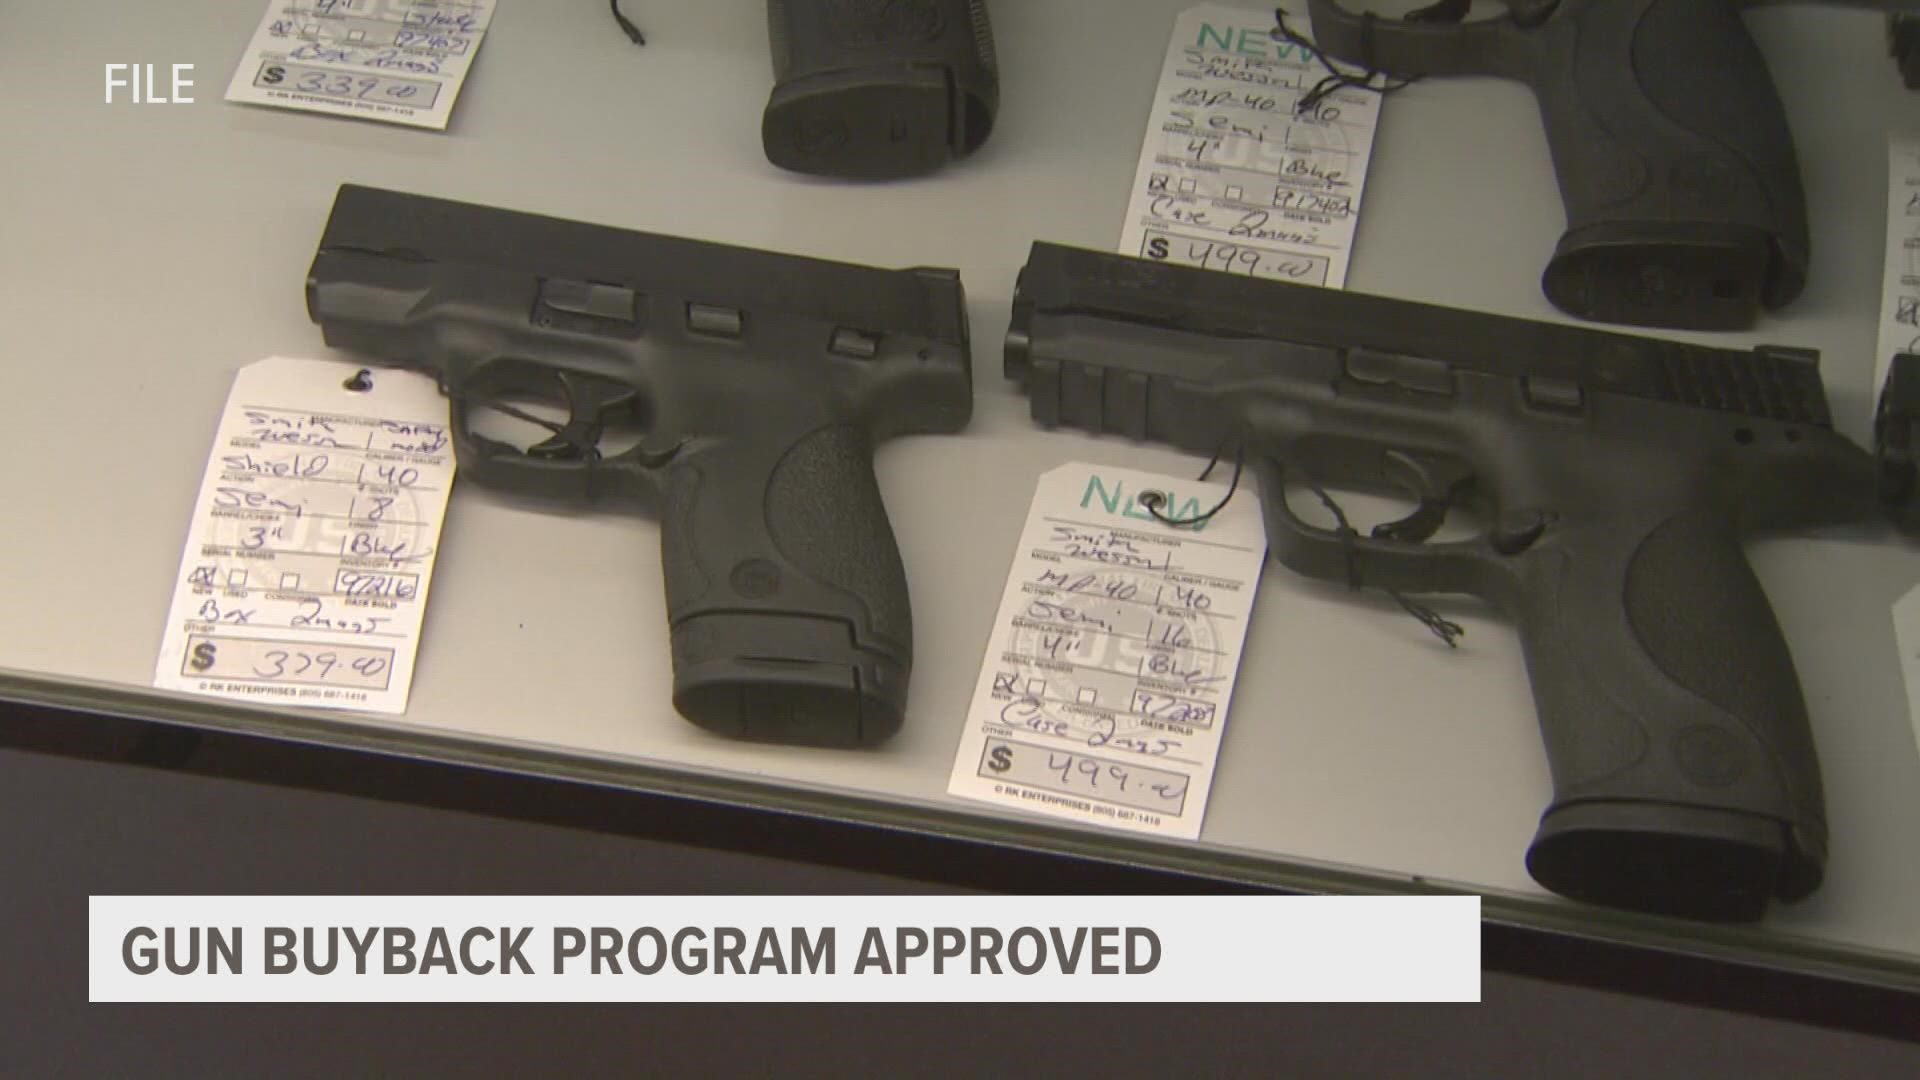 City leaders say residents will be able to turn in guns for gift cards this summer.